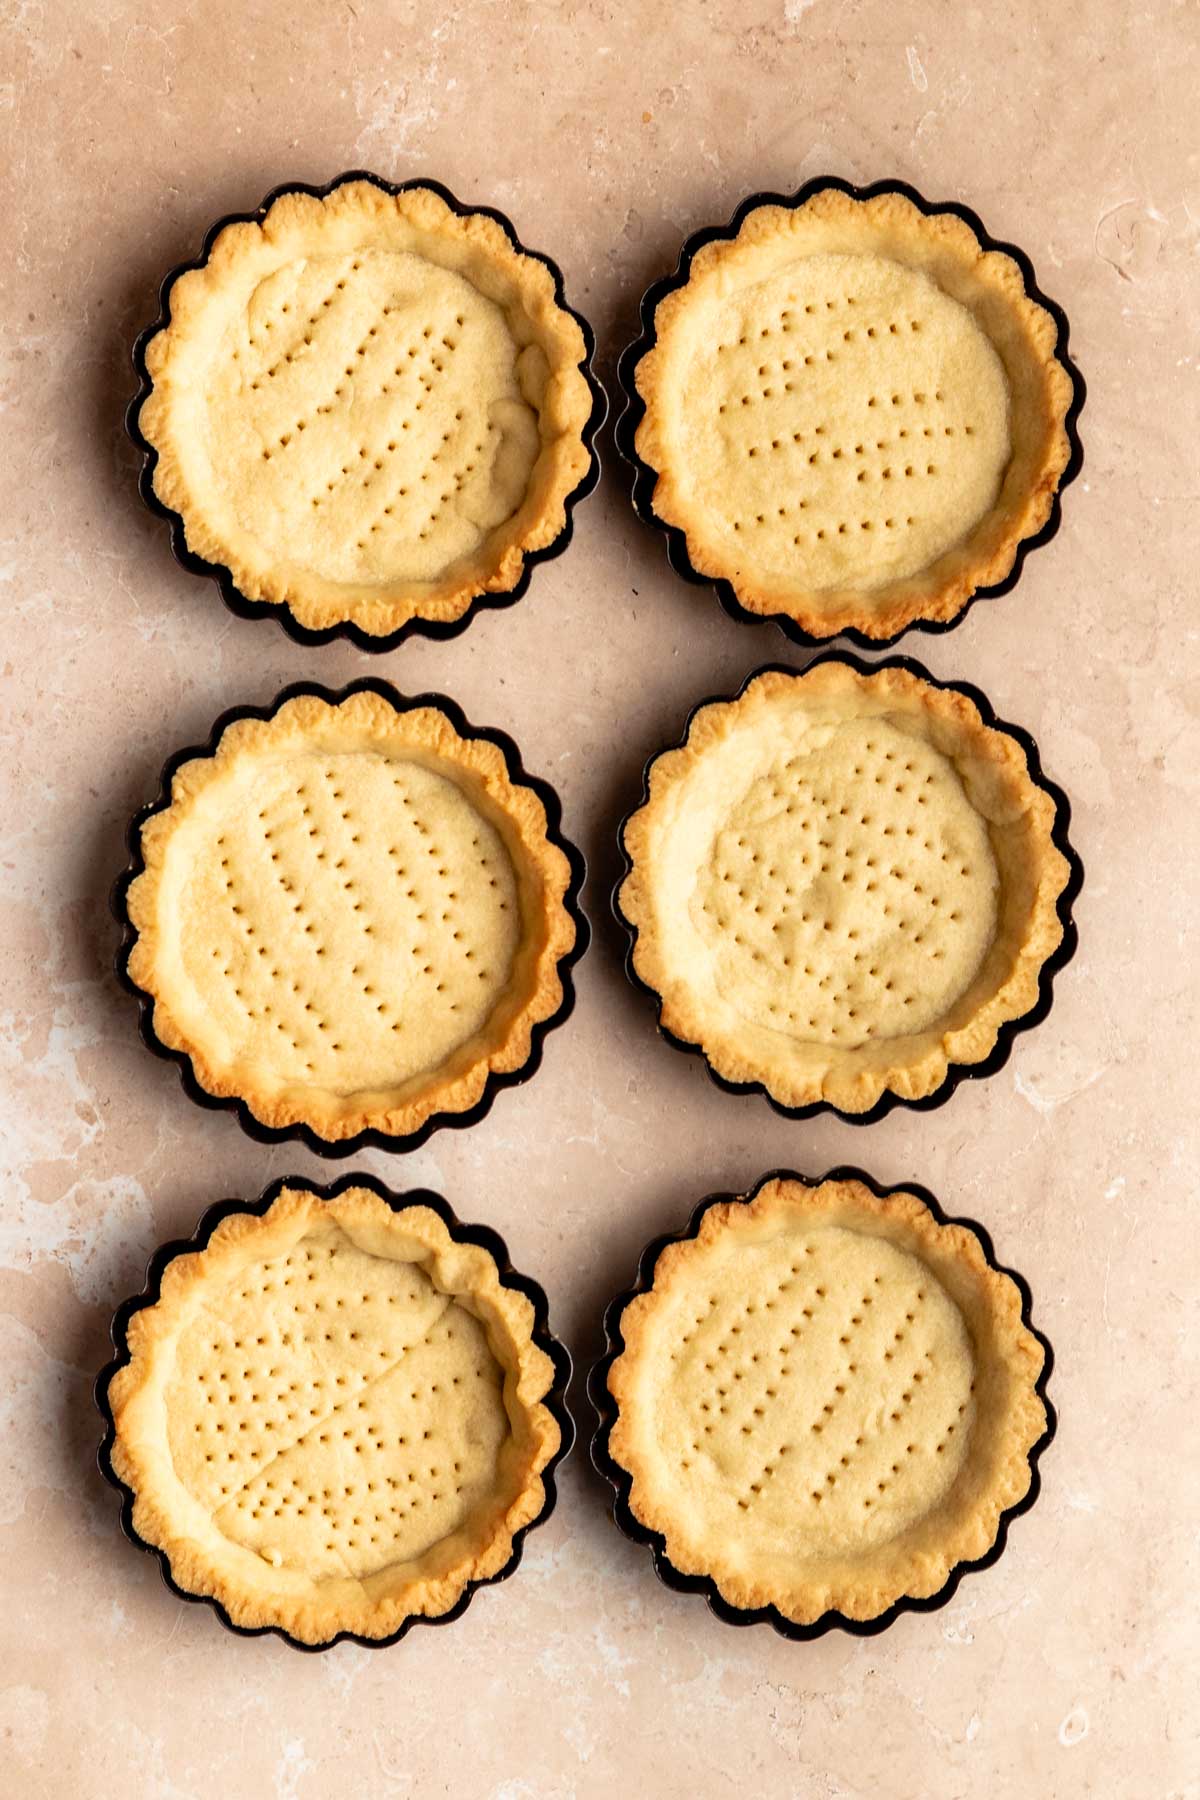 Top of mini tart shells in their pans.